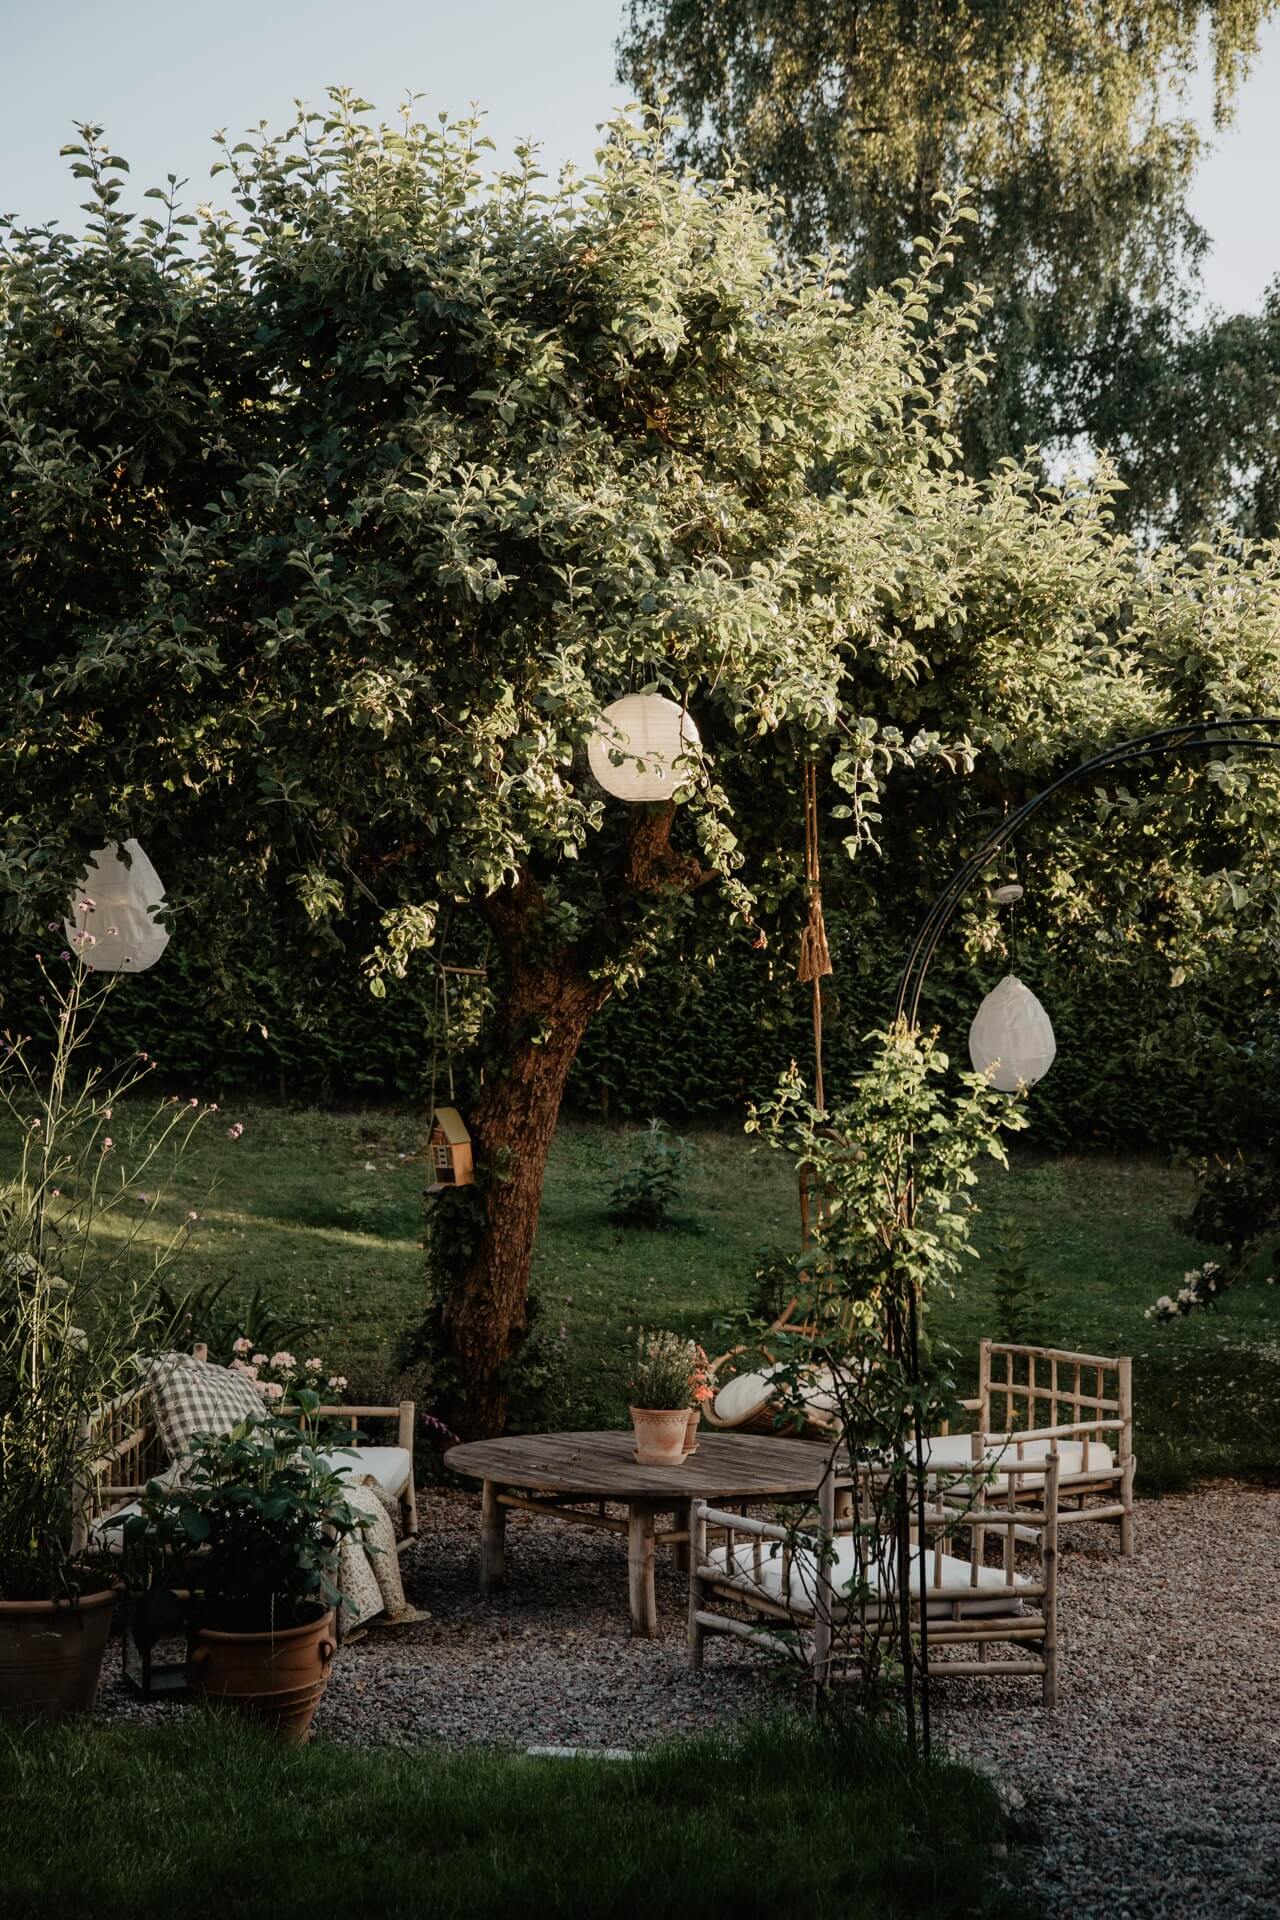 Emelie Sundberg home tour -garden of a Swedish home with outdoor seating area